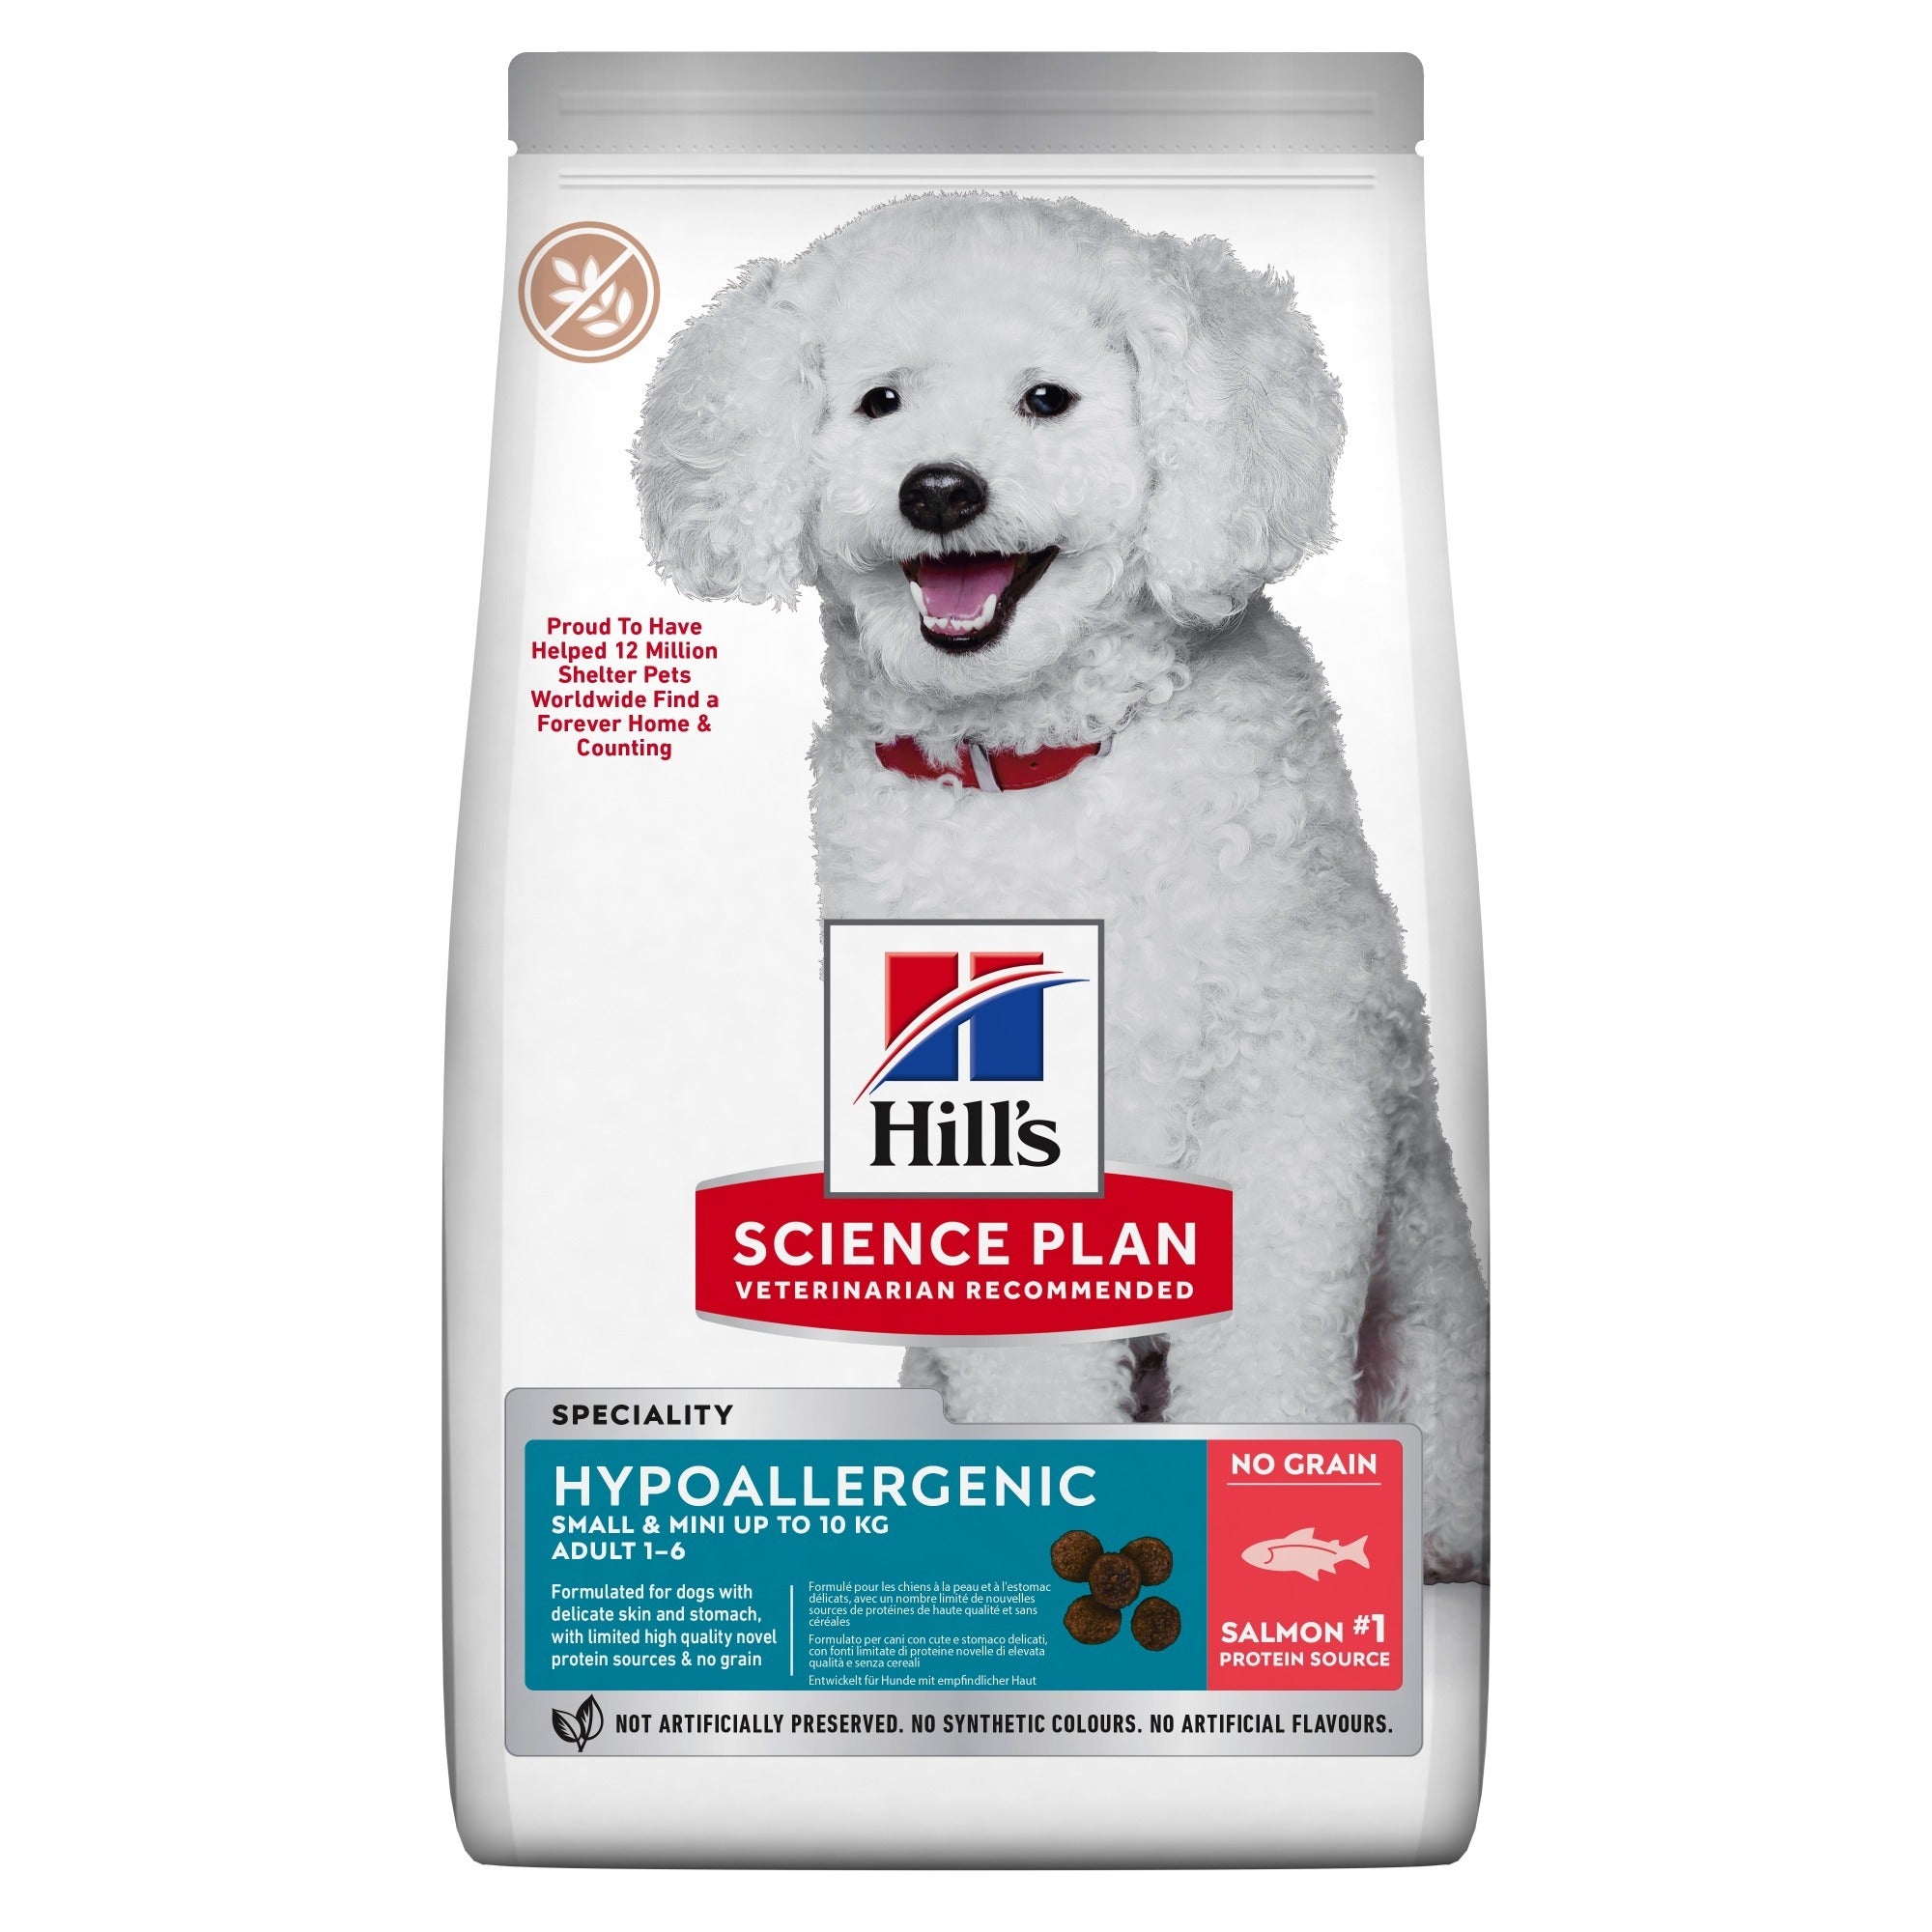 Hill's Science Plan Hypoallergenic Small and Mini Salmon Dry Dog Food